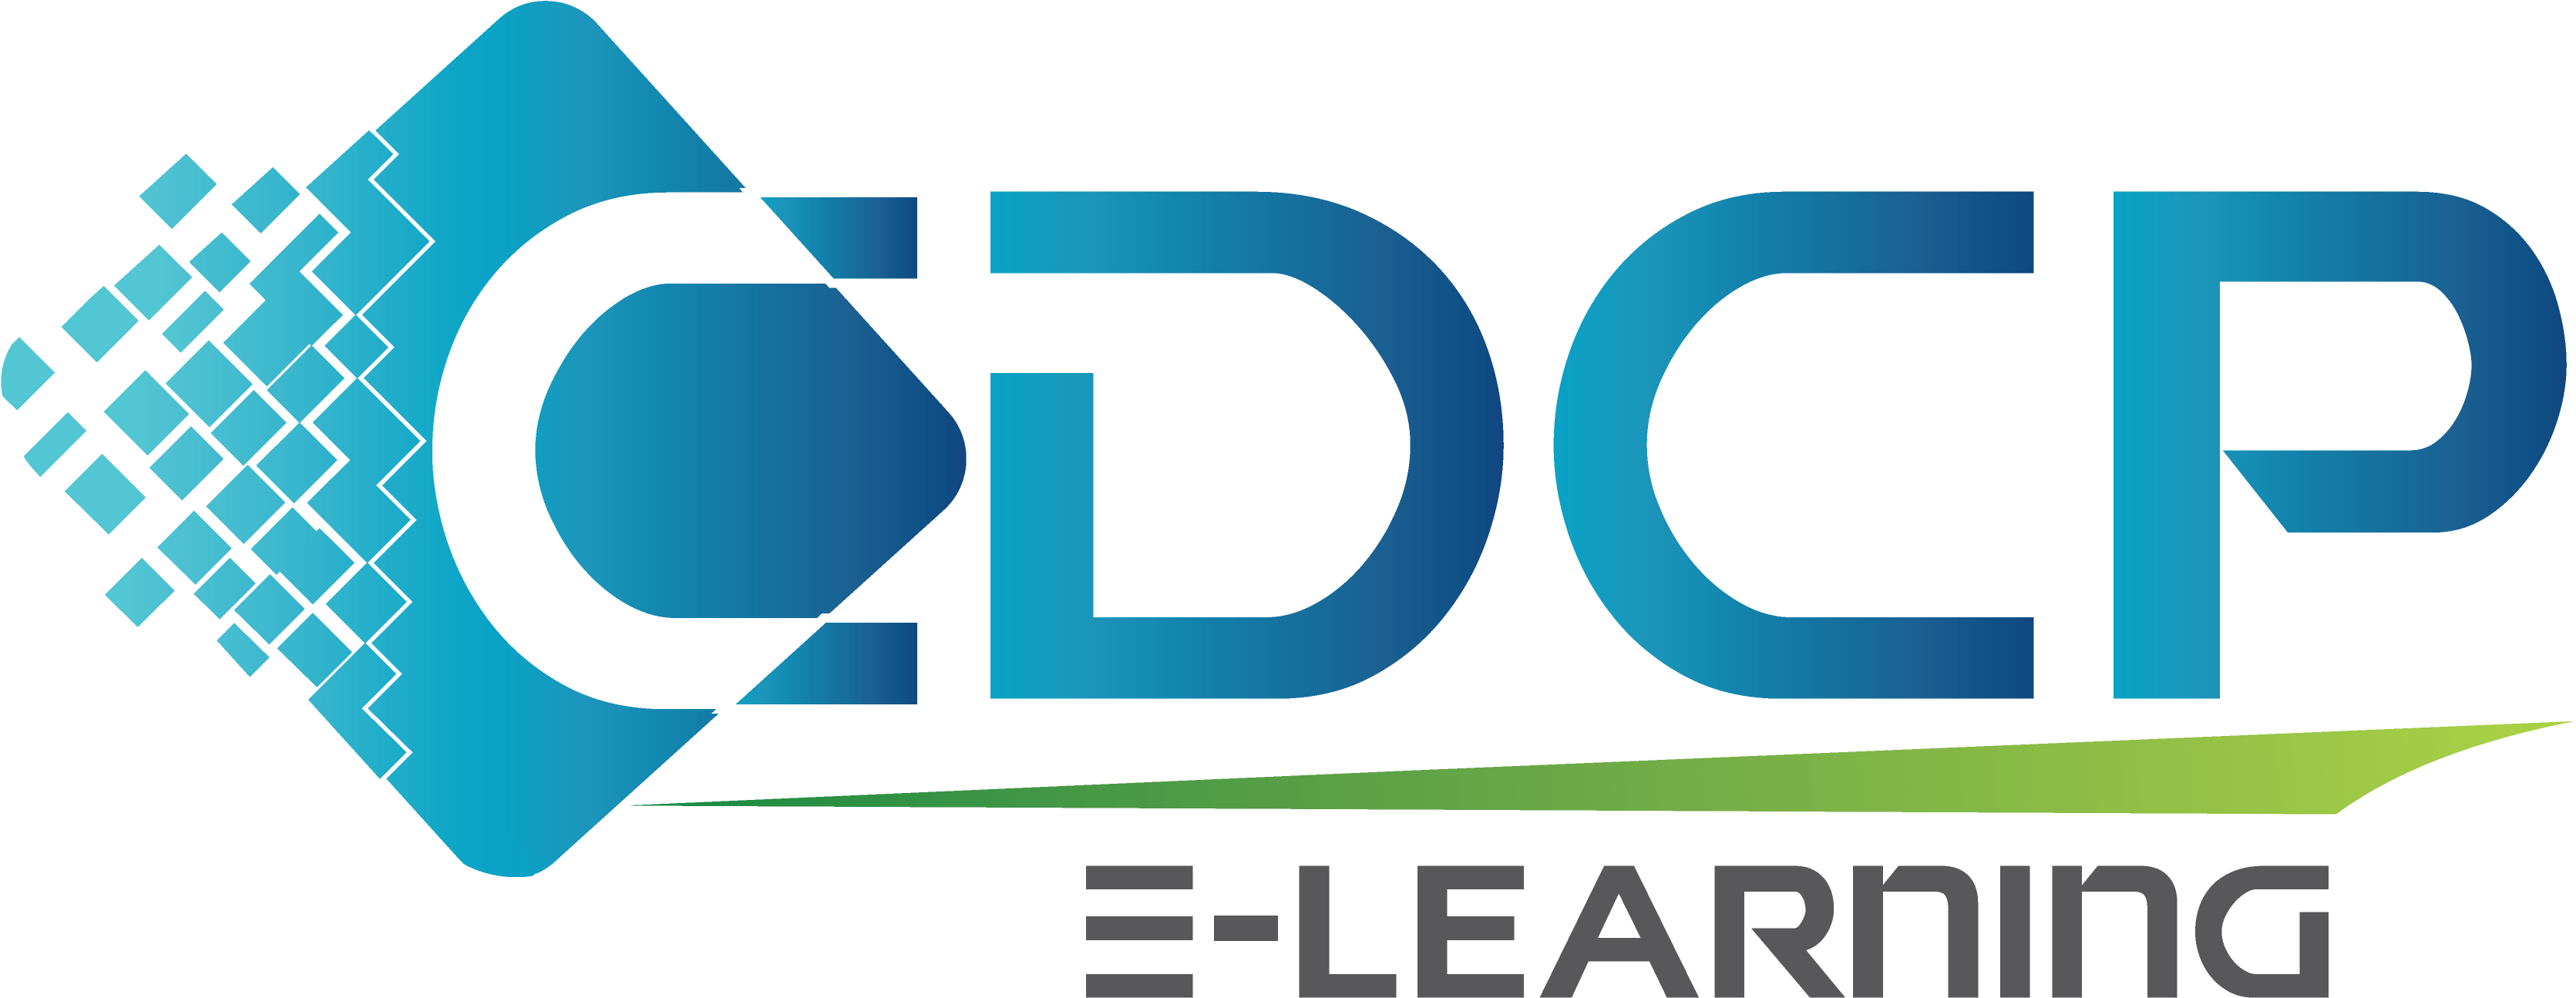 Cdcp E-learning - Educational Technology (3563x1461)